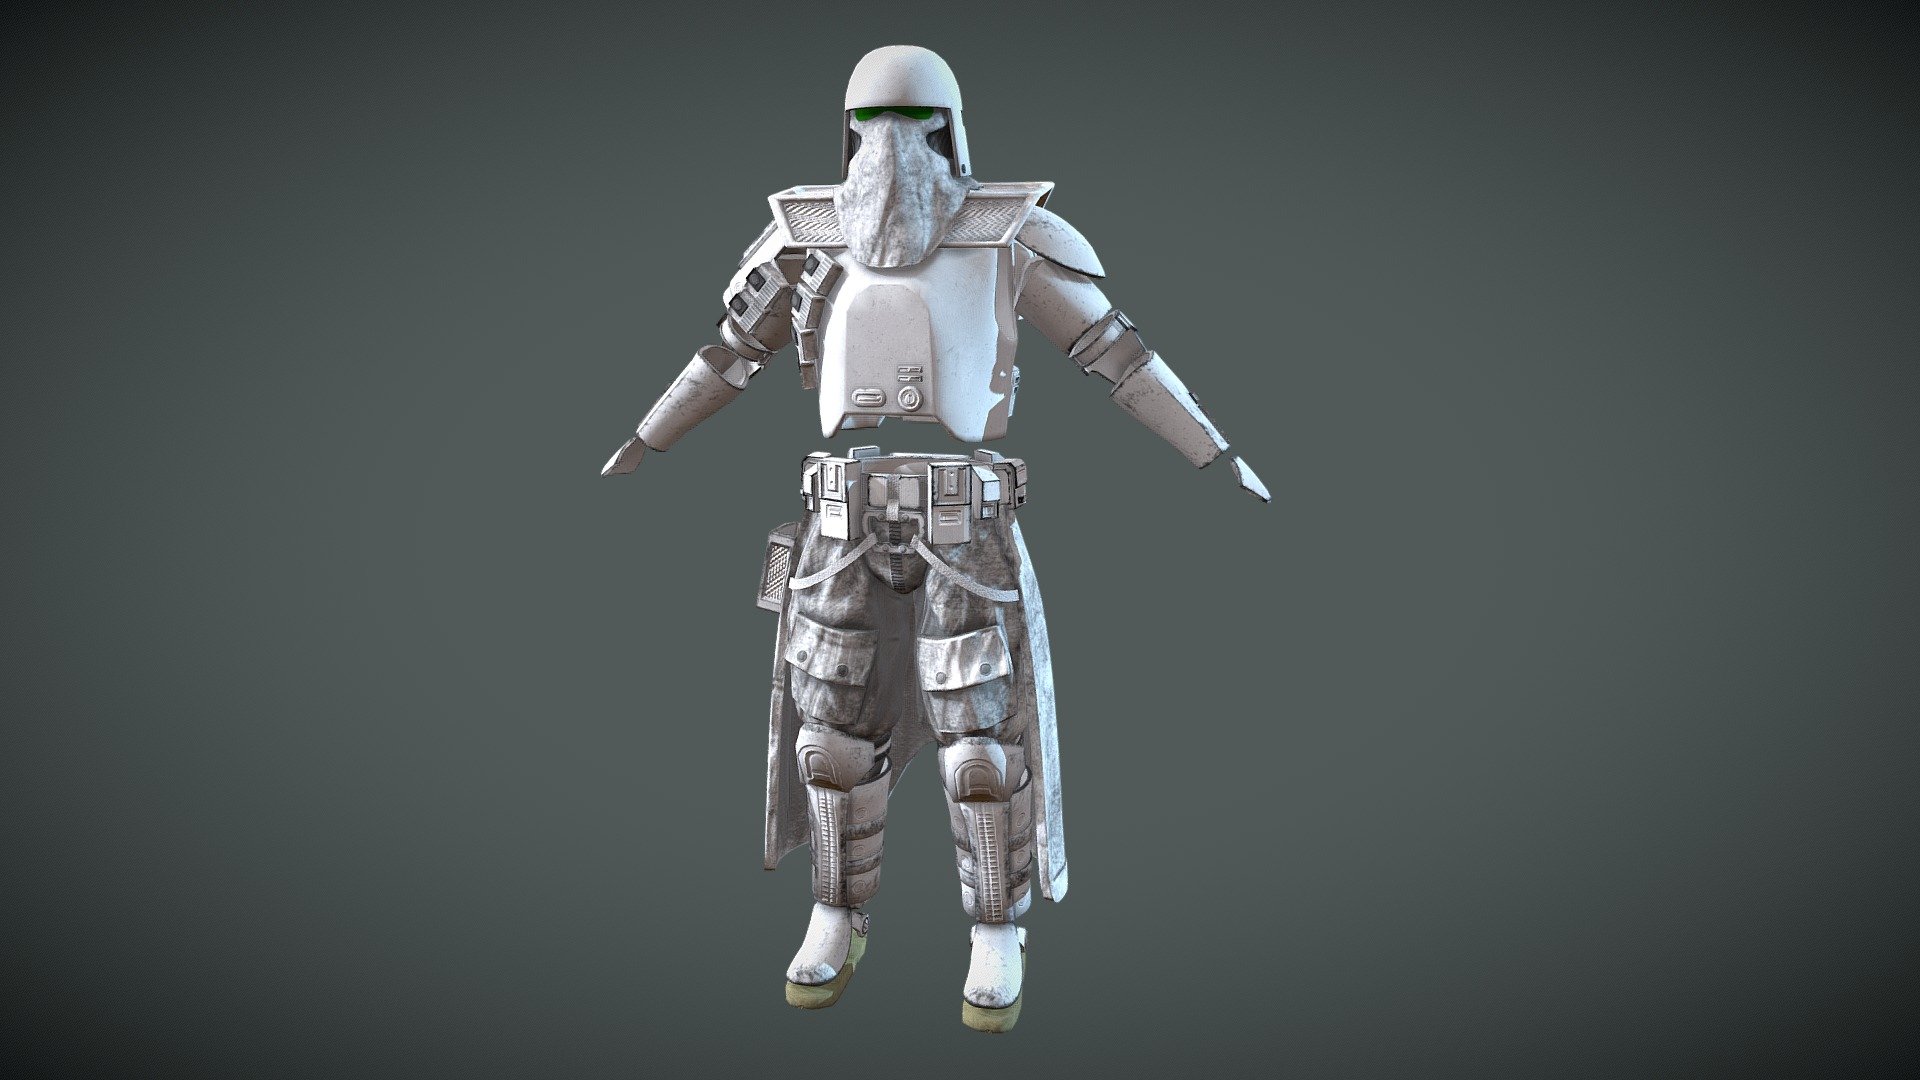 Galactic Marine armor inspired from Star Wars Revenge of the Sith - Model/Art by Outworld Studios

Must give credit to Outworld Studios if using this asset

Show support by joining my discord: https://discord.gg/EgWSkp8Cxn

FYI: The uniform for this Galactic Marine armor set is the same one for the Phase II Clone Trooper, you can download it here https://sketchfab.com/3d-models/star-wars-phase-2-clone-trooper-1fd3c5dfd9864394b1cbaf780e1779bd - Galactic Marine - Star Wars - Buy Royalty Free 3D model by Outworld Studios (@outworldstudios) 3d model